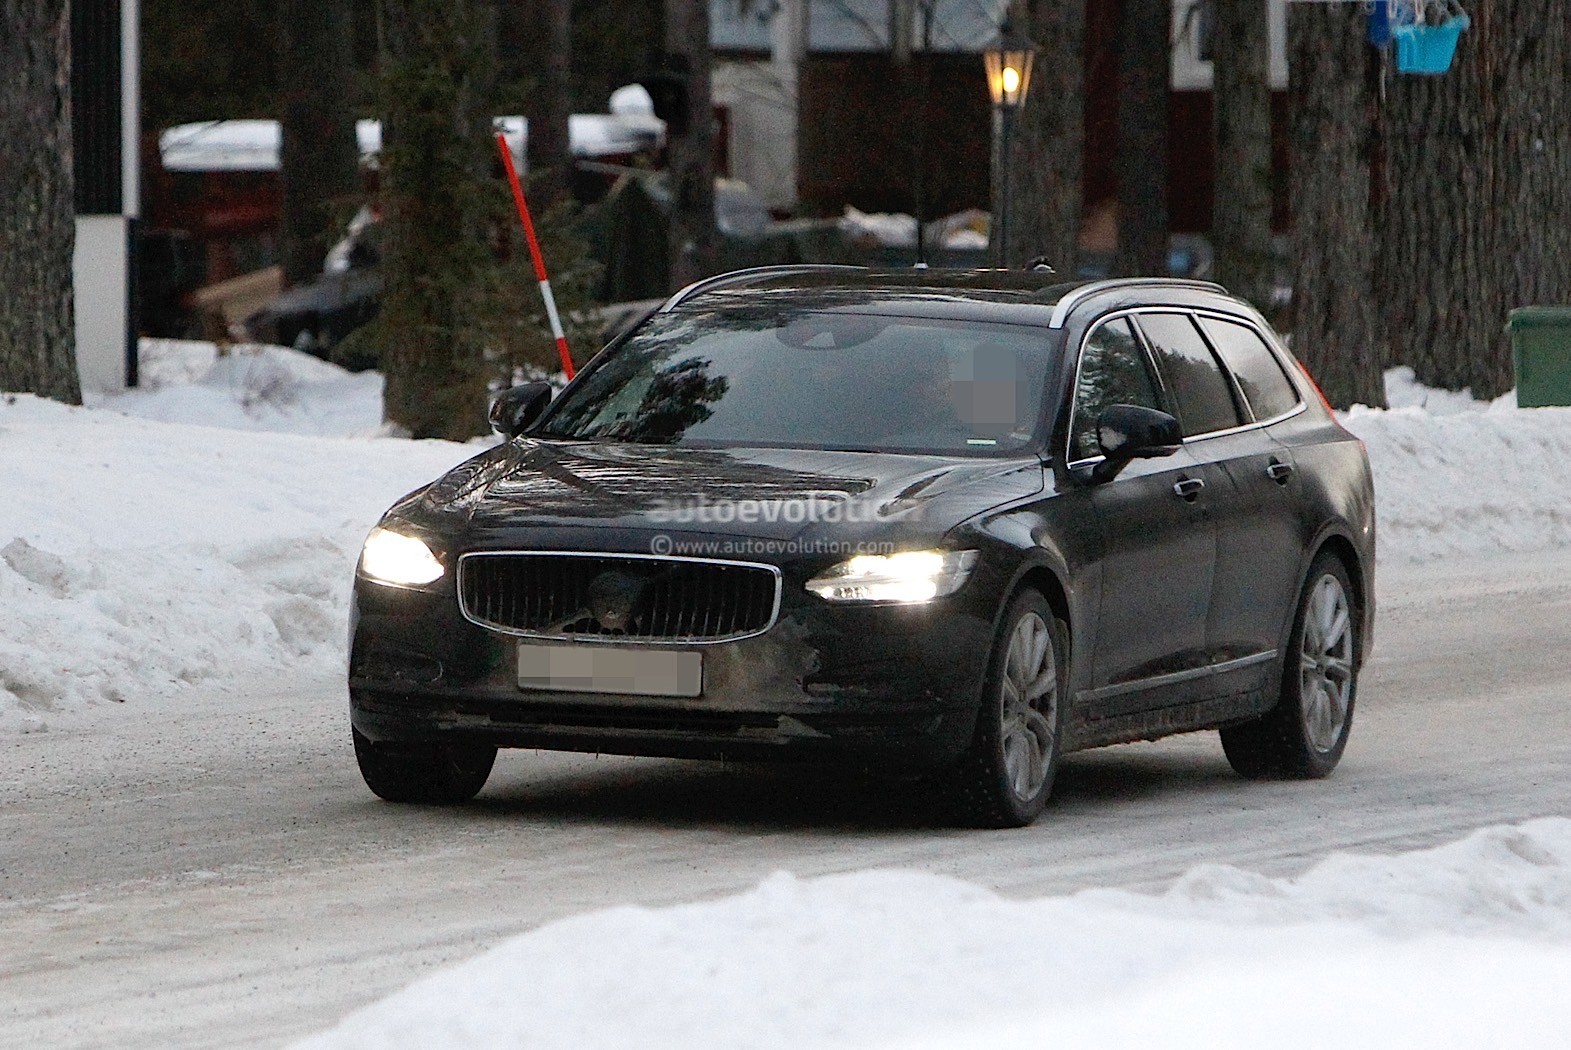 https://s1.cdn.autoevolution.com/images/news/gallery/2021-volvo-s90-and-v90-facelift-wear-useless-camouflage-winter-testing_5.jpg